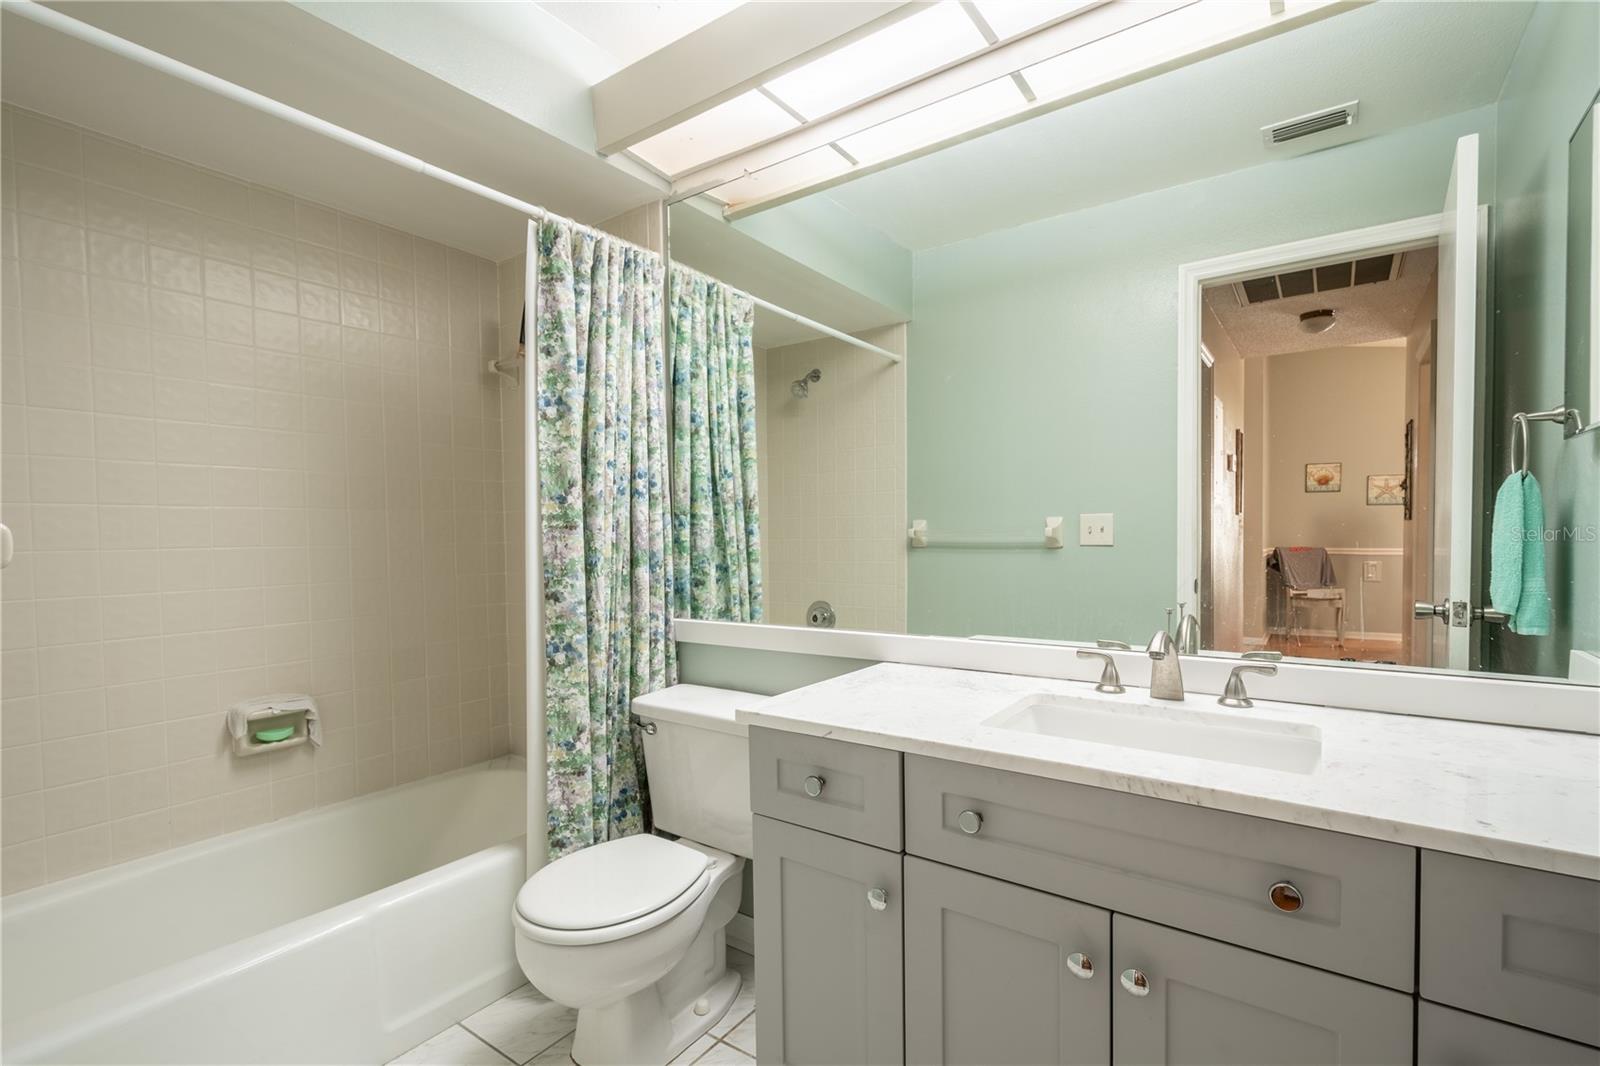 The large inside laundry room features full size washer/dryer, shelving and storage closet.